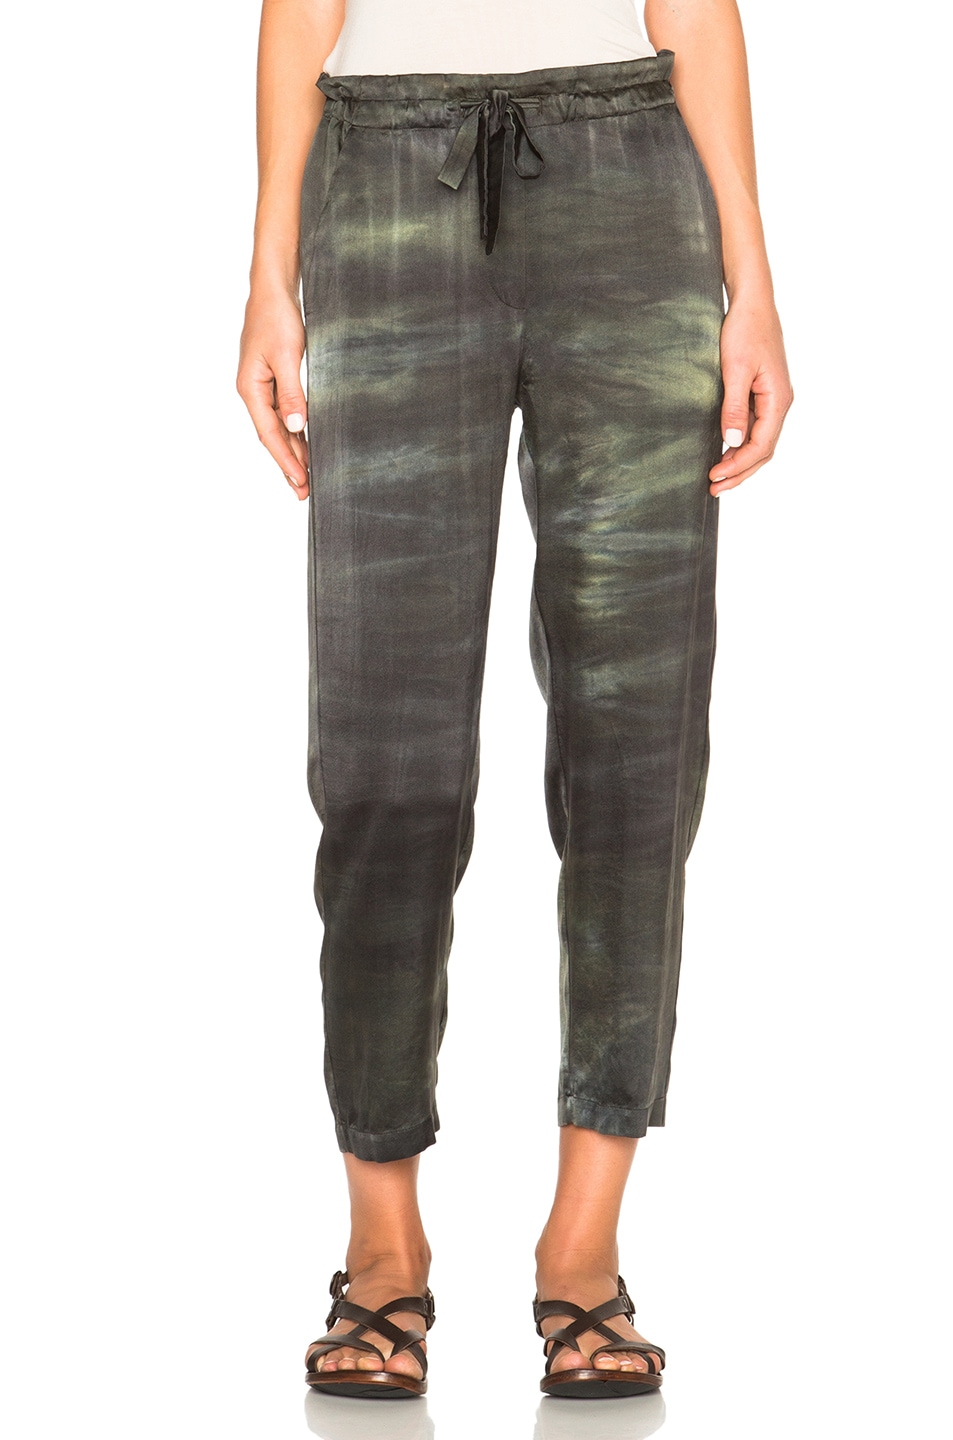 Image 1 of Raquel Allegra Slouchy Belted Pants in Olive Tie Dye